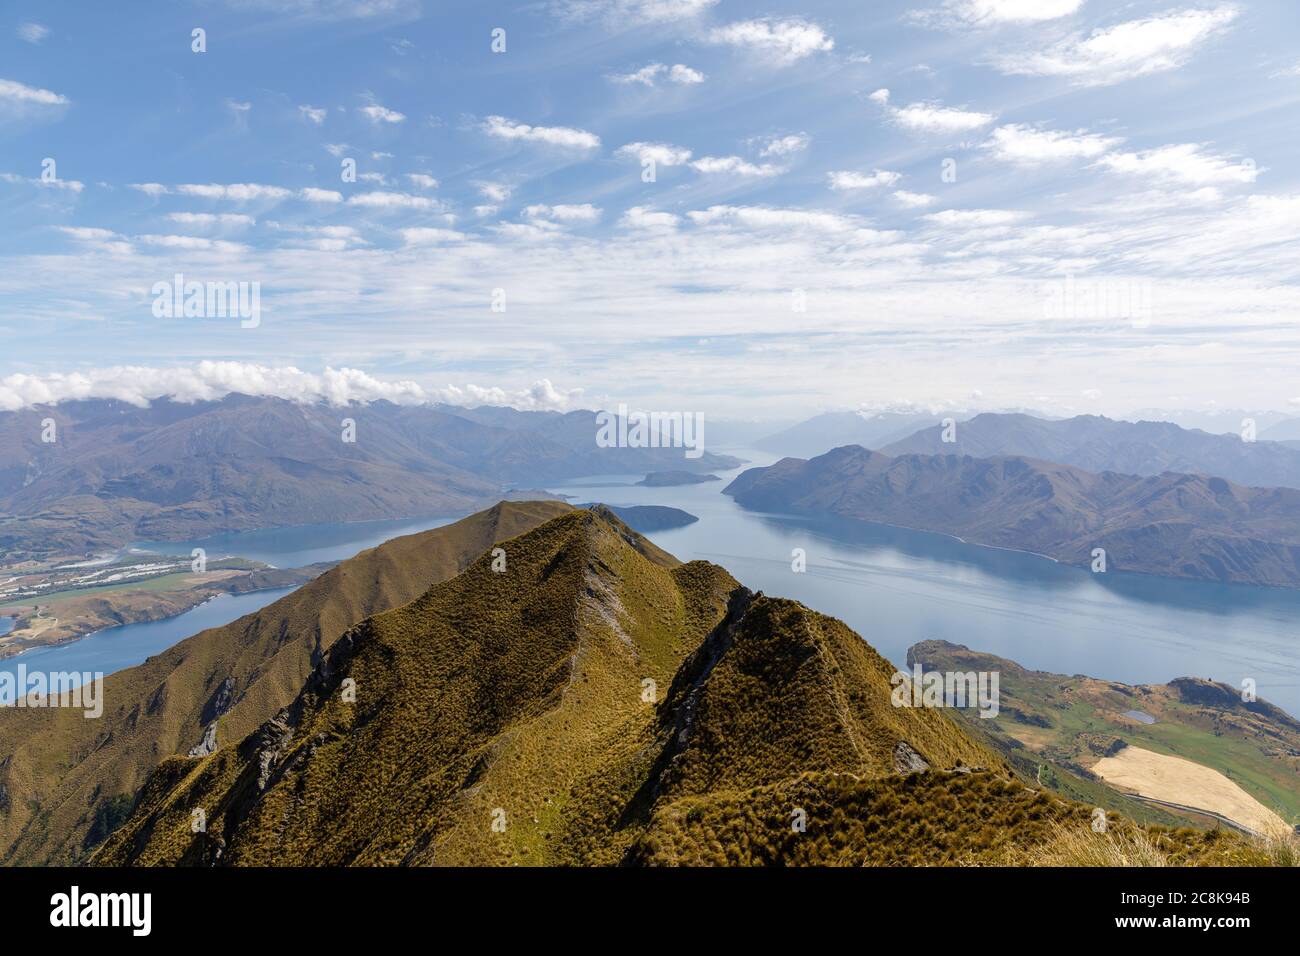 The view from Roys Peak Lookout over a ridge with Lake Wanaka and white pattered clouds on a blue sky. Stock Photo